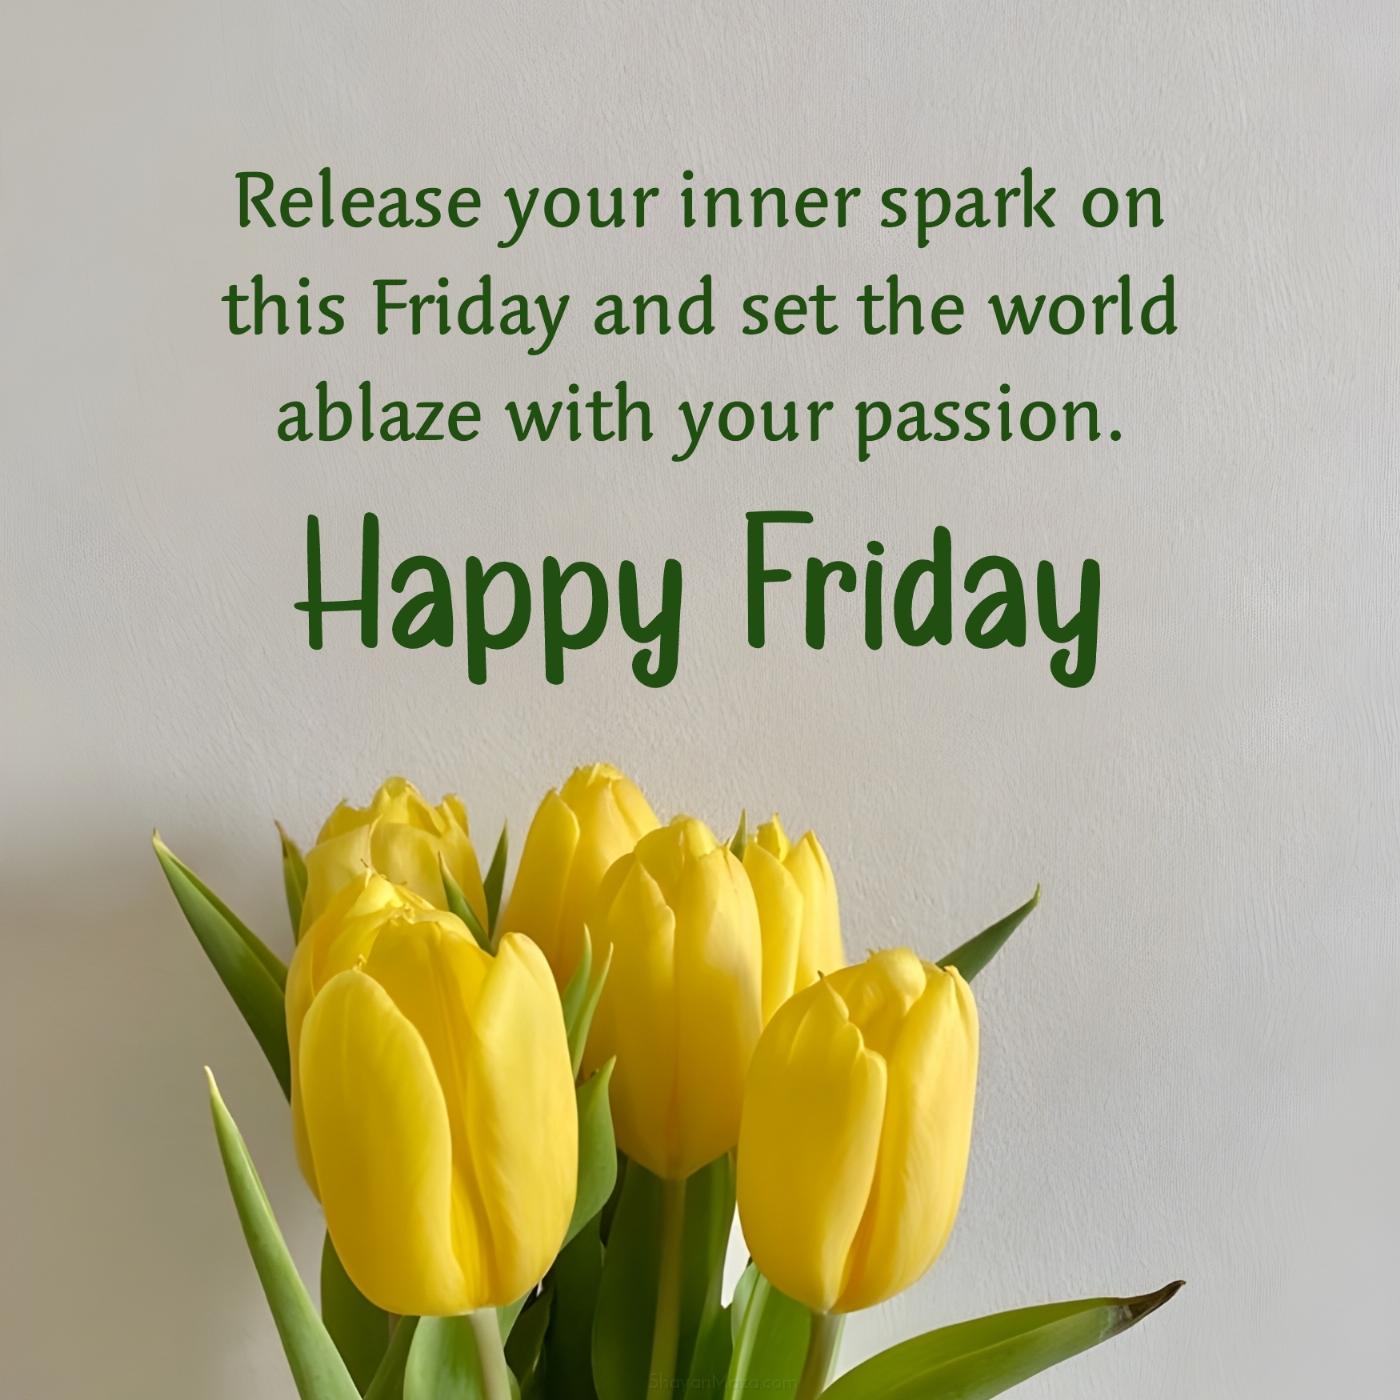 Release your inner spark on this Friday and set the world ablaze